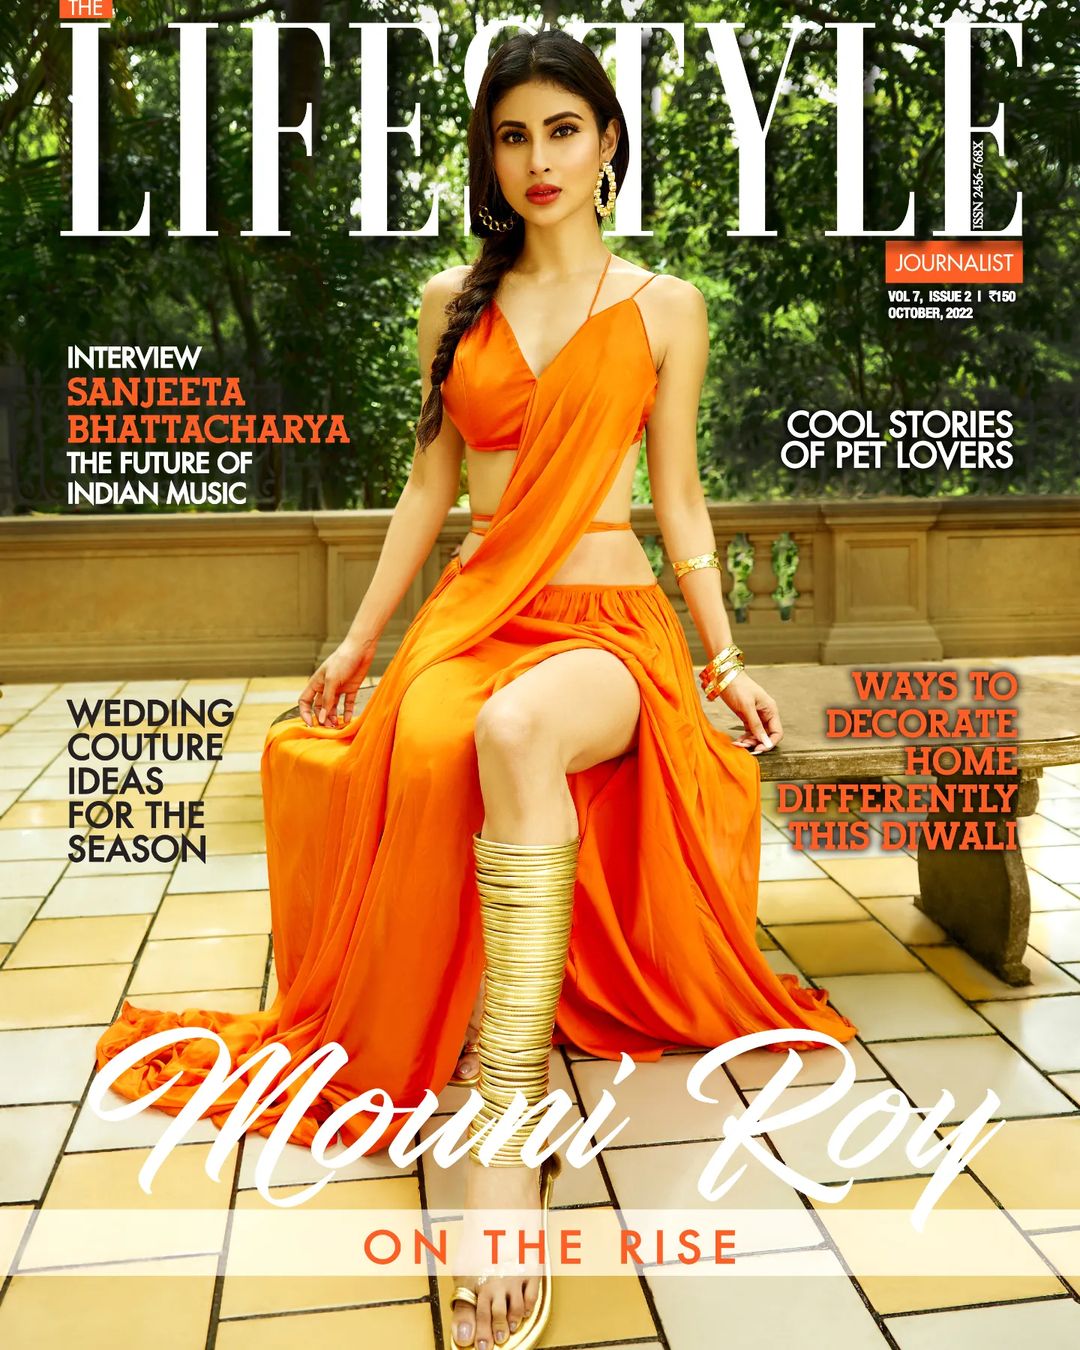 Mourni Roy cover shoot for the lifestyle journalist magazine October edition 2022